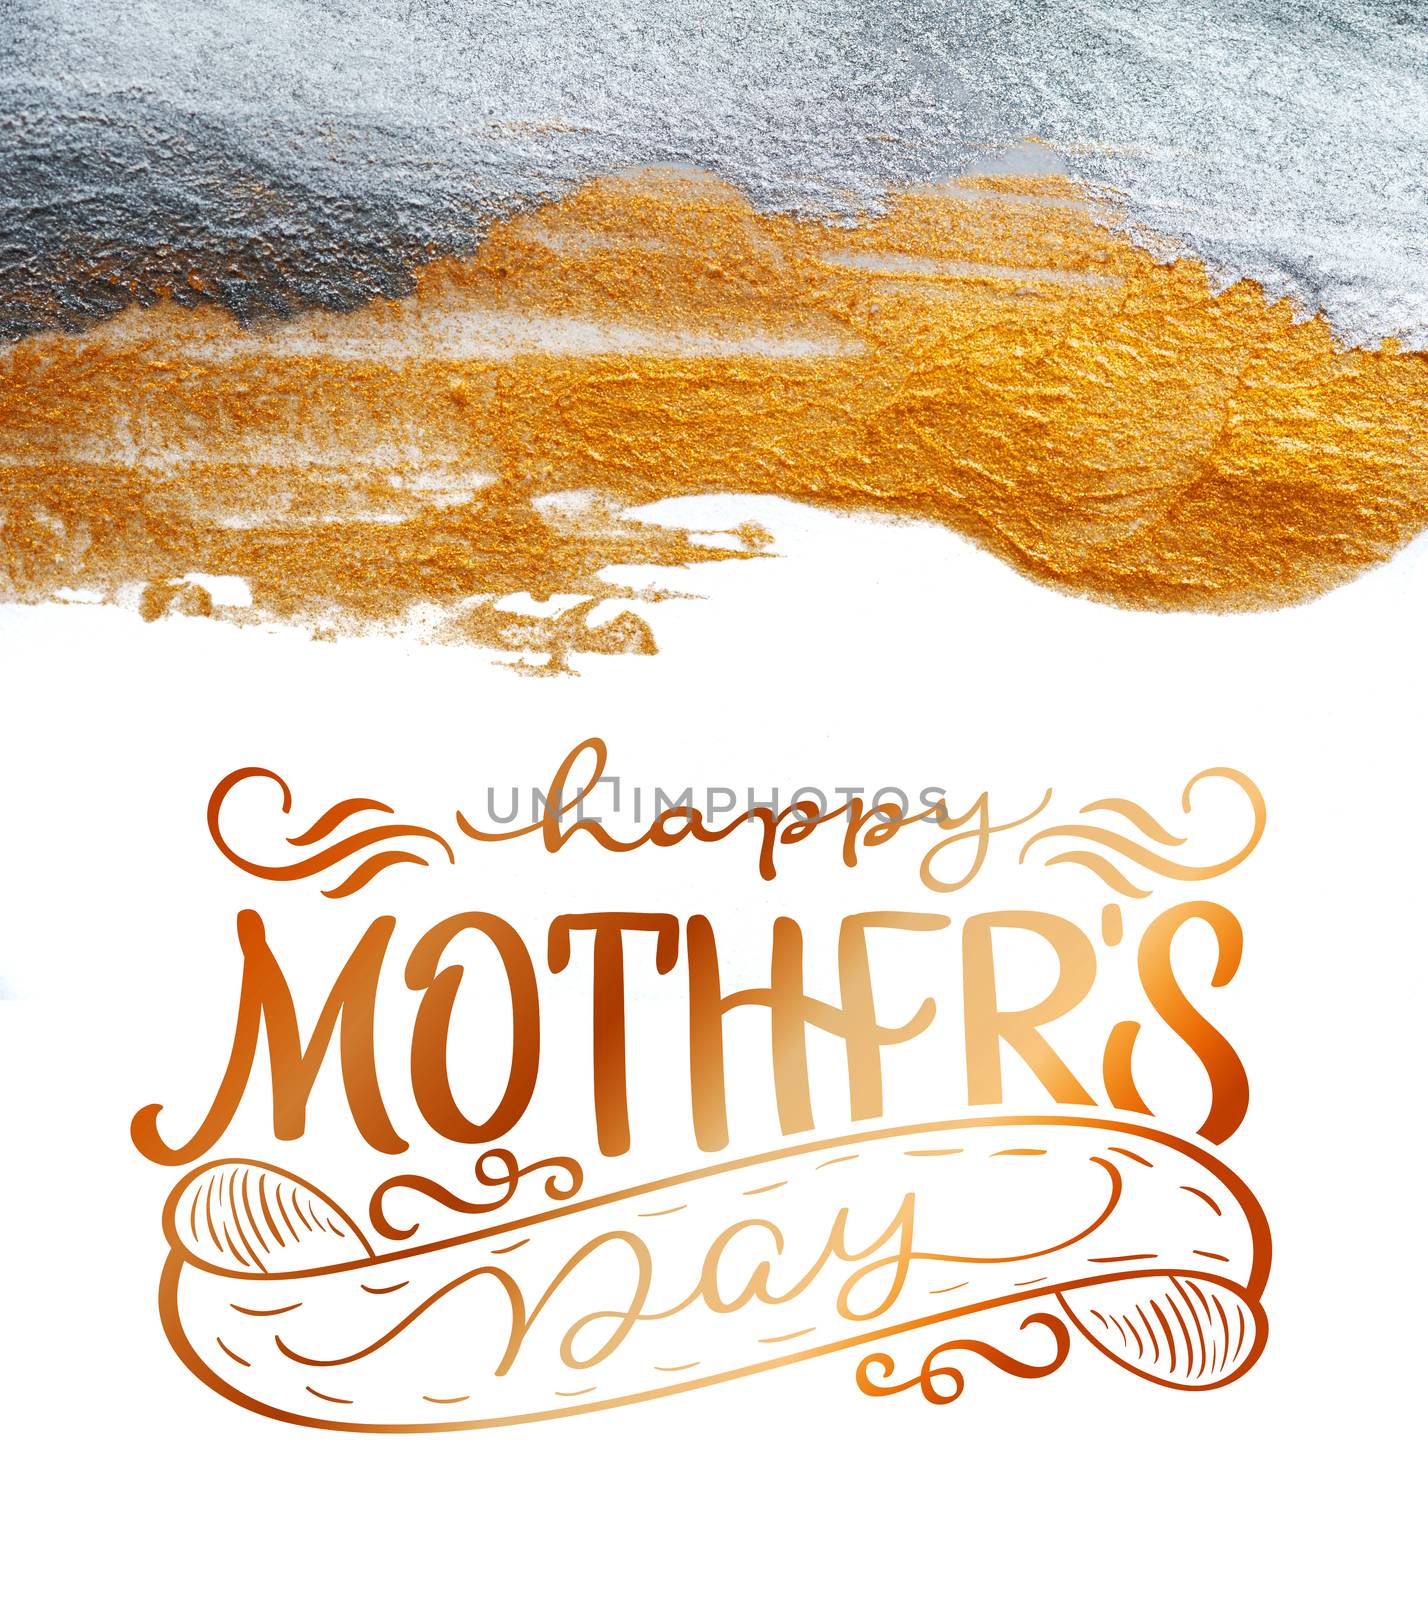 Abstract golden and silver background with a brush of acrylic paint on paper and text Happy mothers day. Calligraphy lettering hand draw.